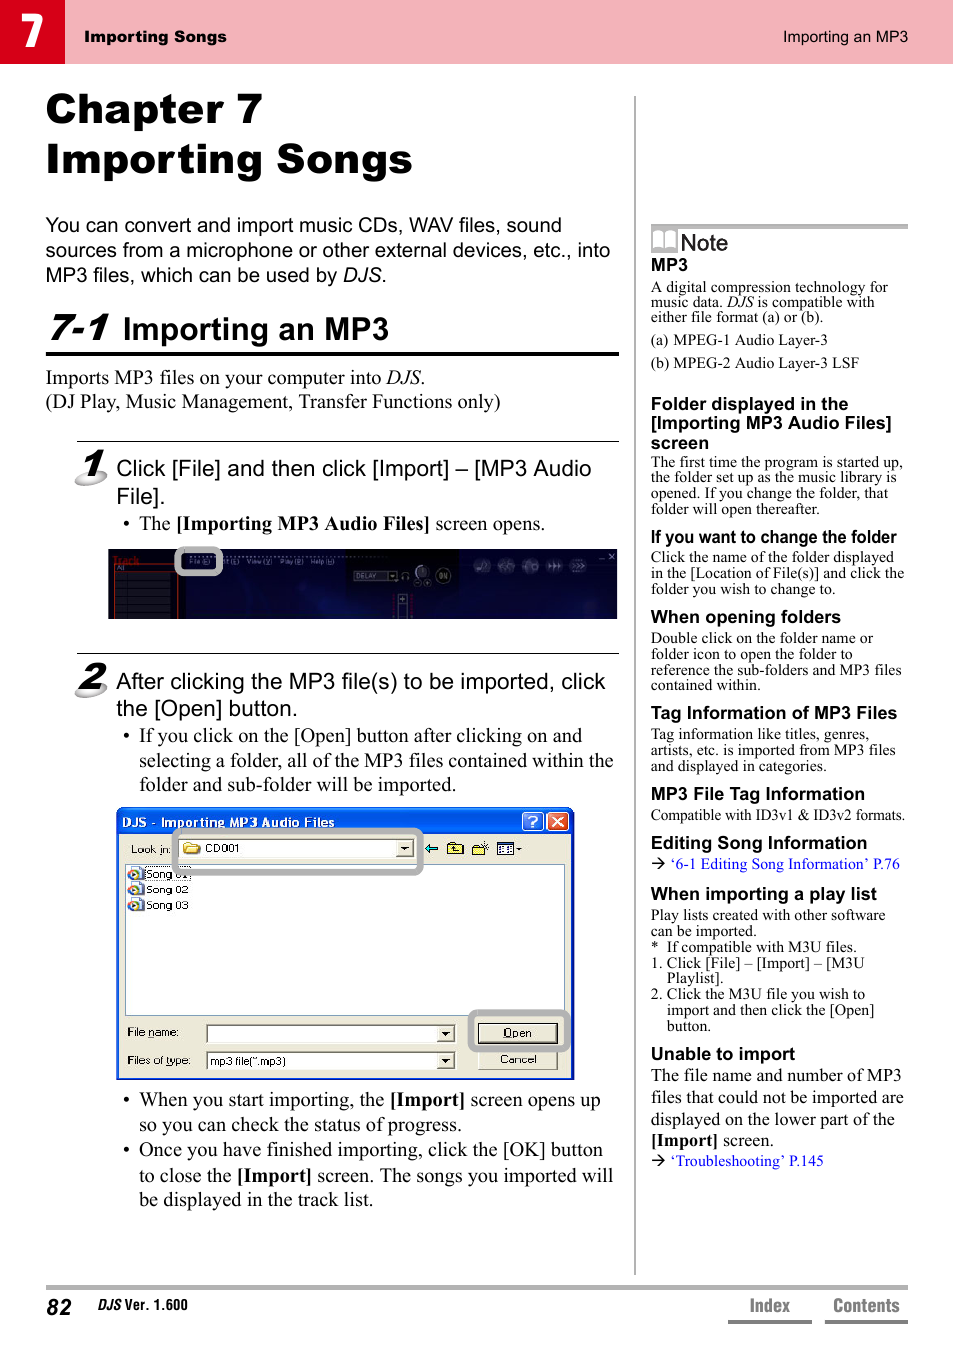 Chapter 7 importing songs, 1 importing an mp3, Importing an mp3 | 1 importing an mp3’ p.82 | Pioneer SVJ-DL01 User Manual | Page 82 / 156